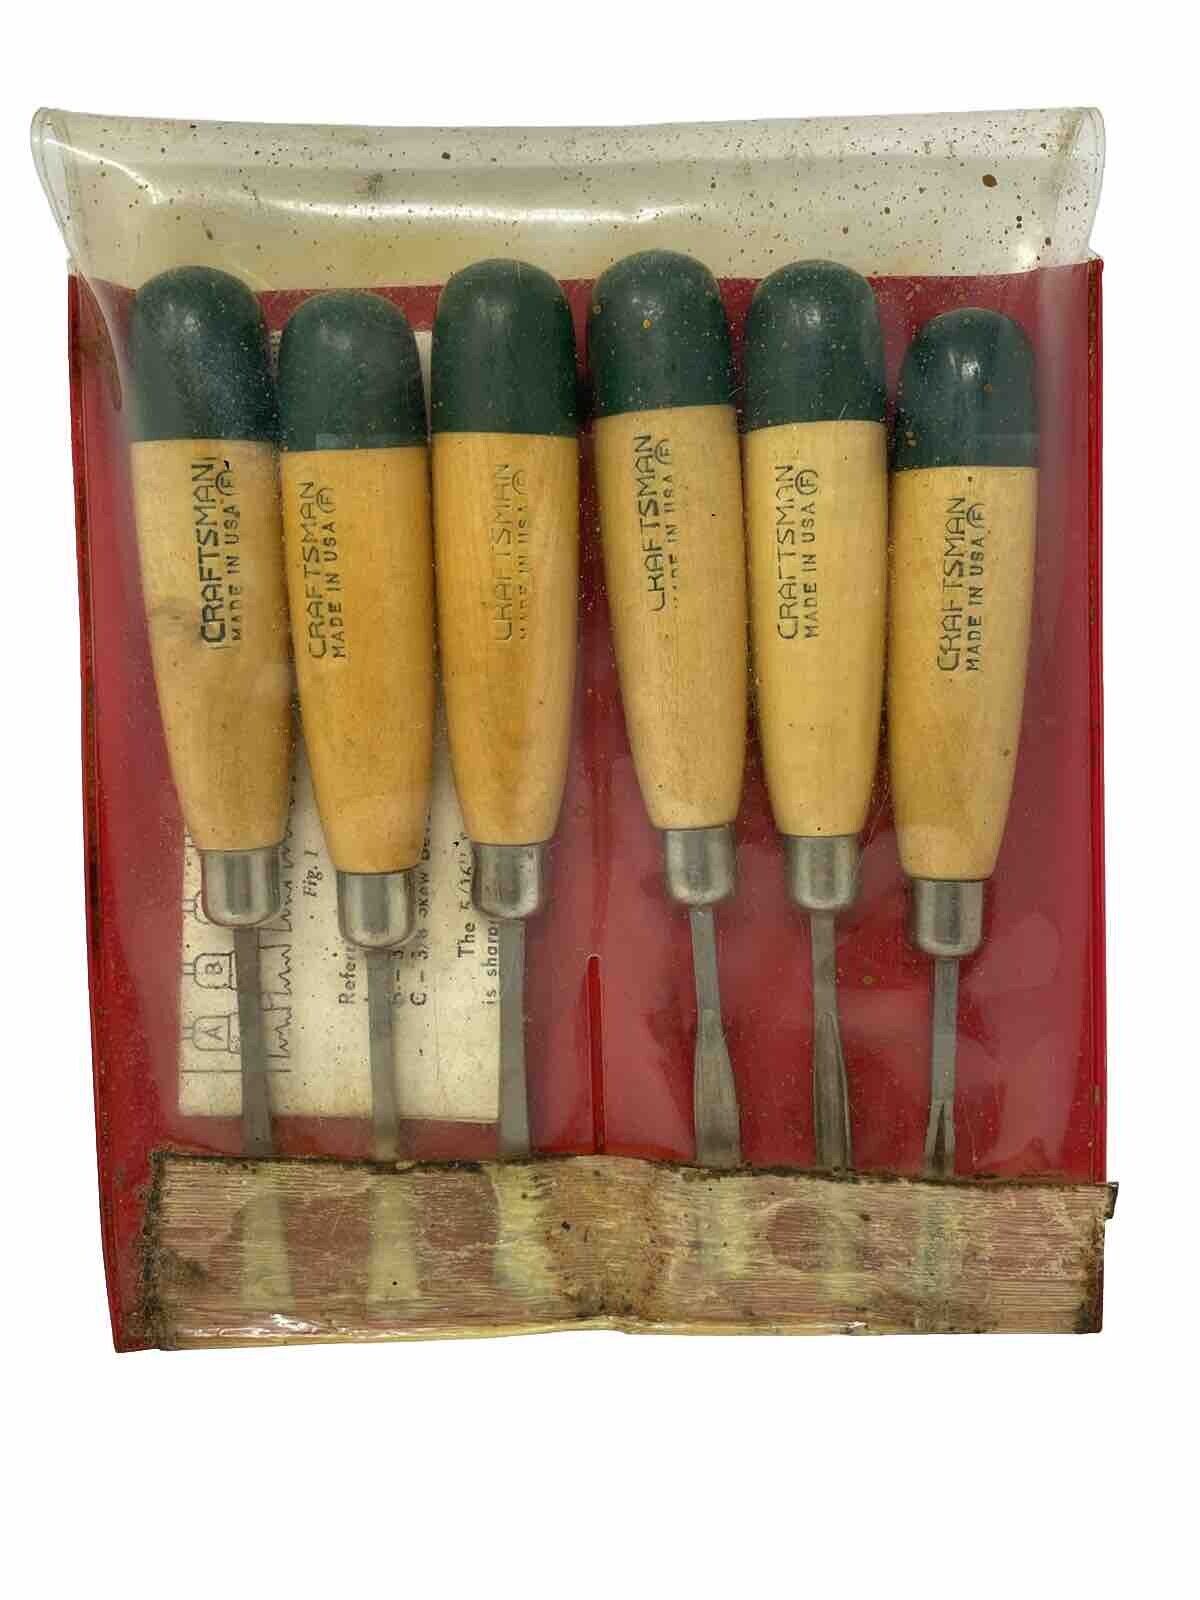 Vintage Craftsman Wood Carving Chisels Tool Set with Pouch, 6 pc. No. 3689